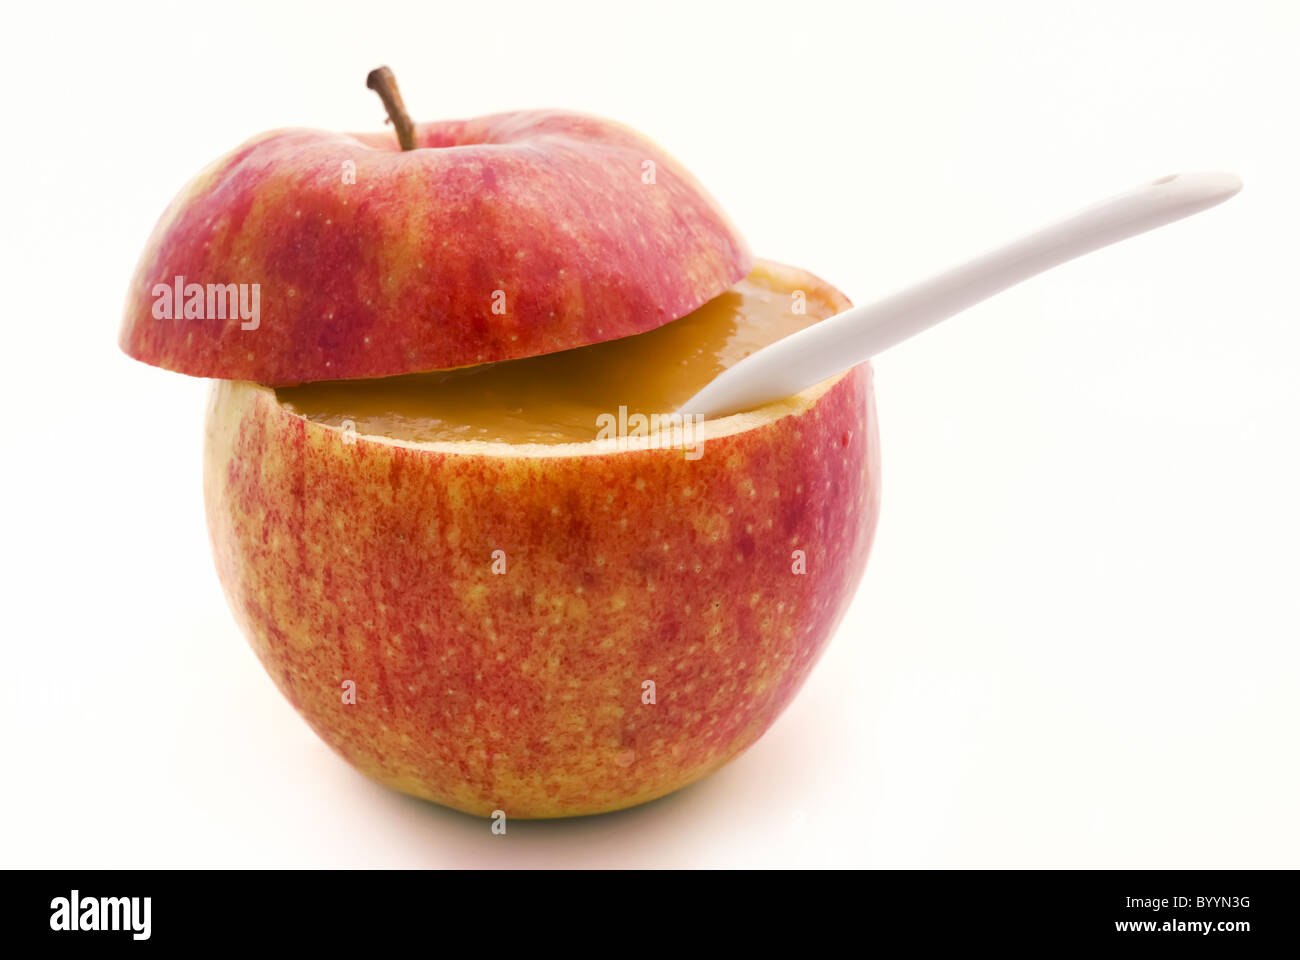 Apple compote in apple as closeup on white background Stock Photo